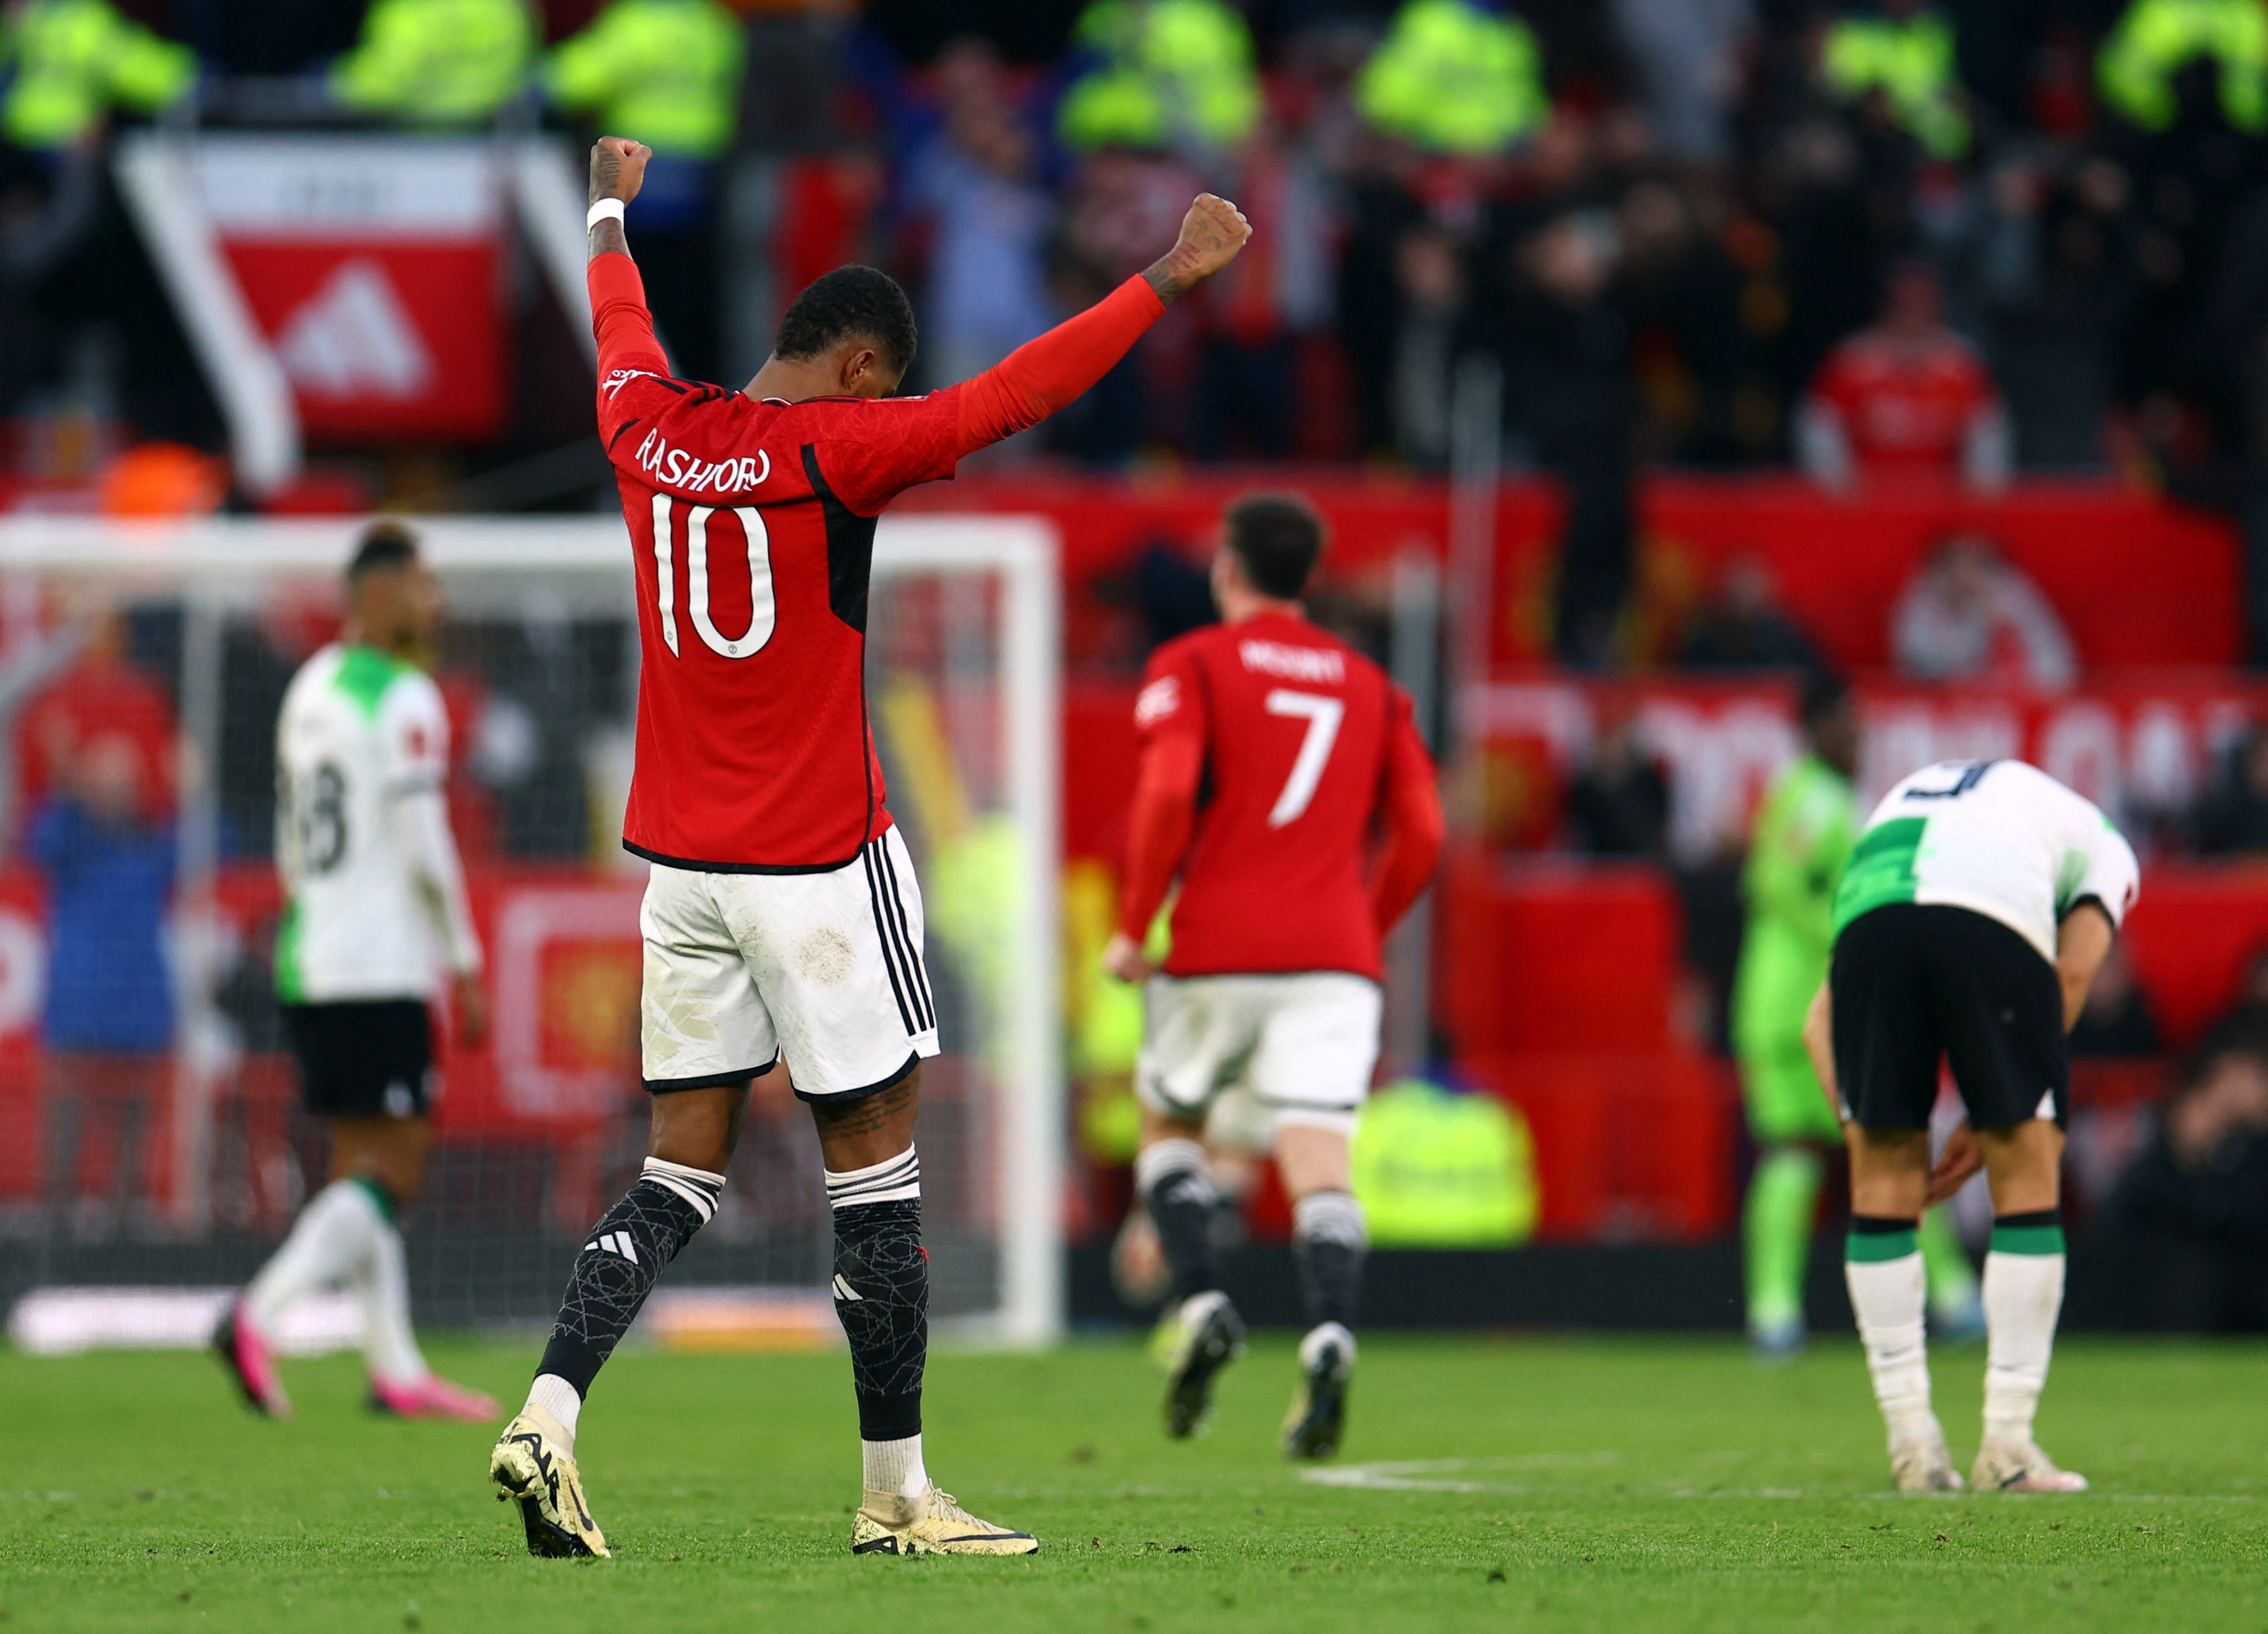 Rashford celebrates after United knocked Liverpool out of the FA Cup